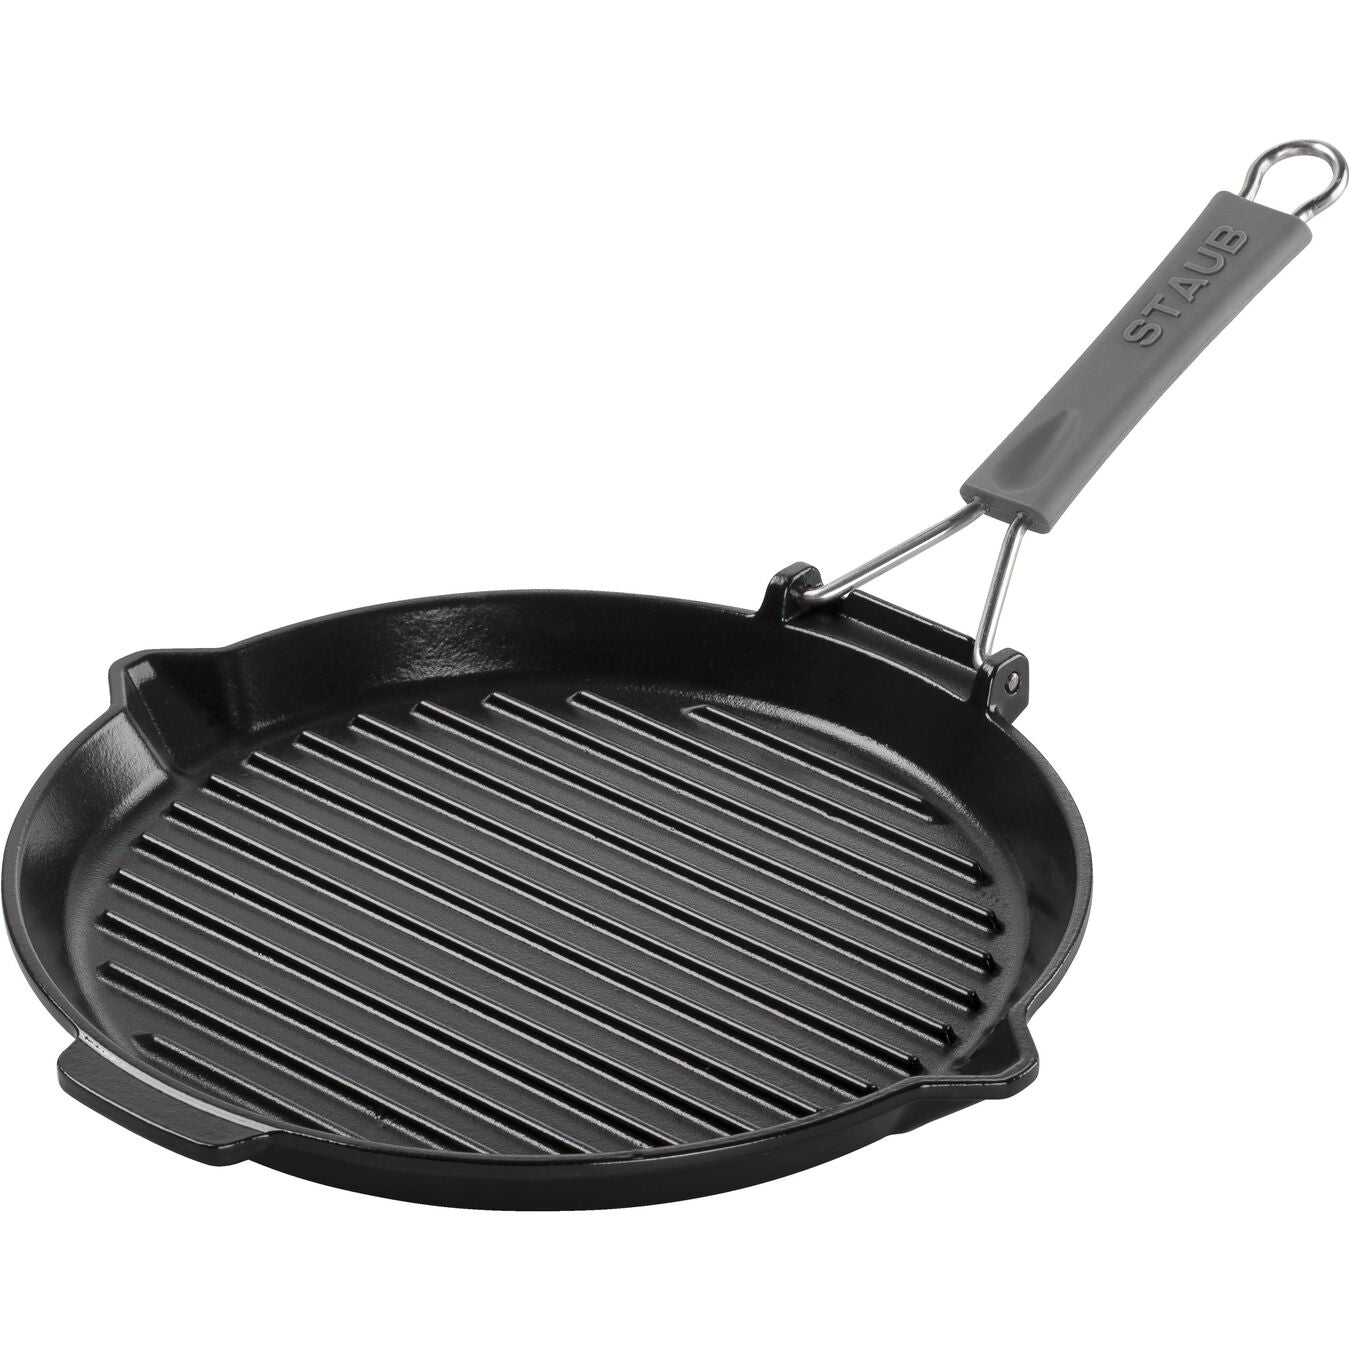 Staub Grill Pans Grill pan with spouts round 28 cm, Black